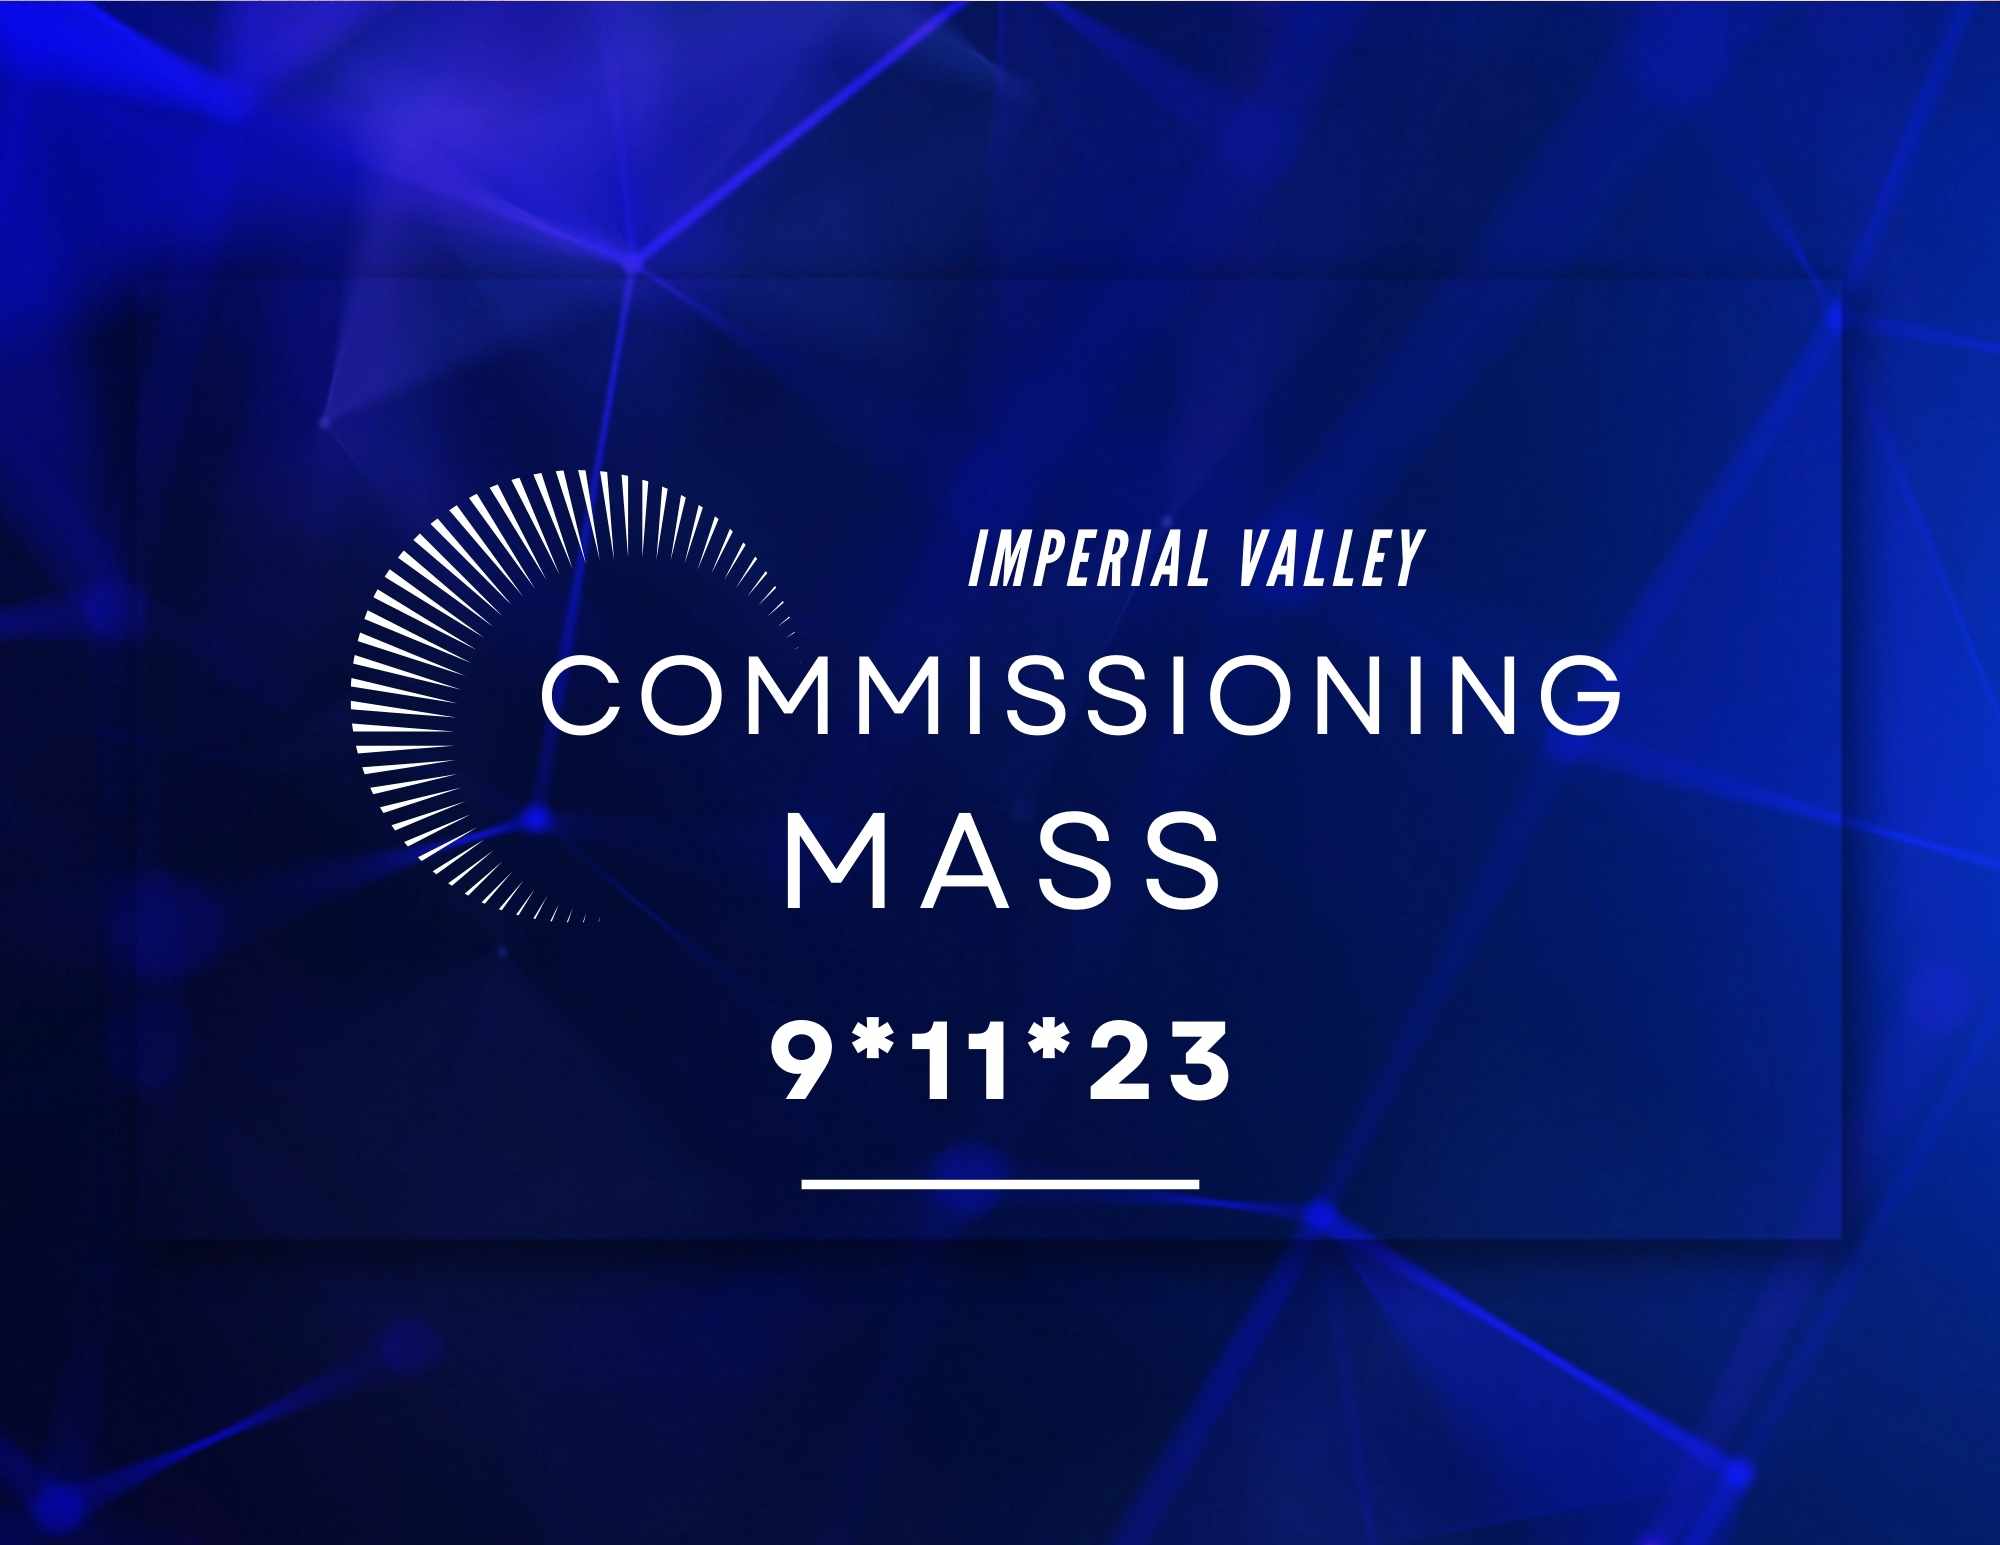 Commissioning Mass-Imperial Valley